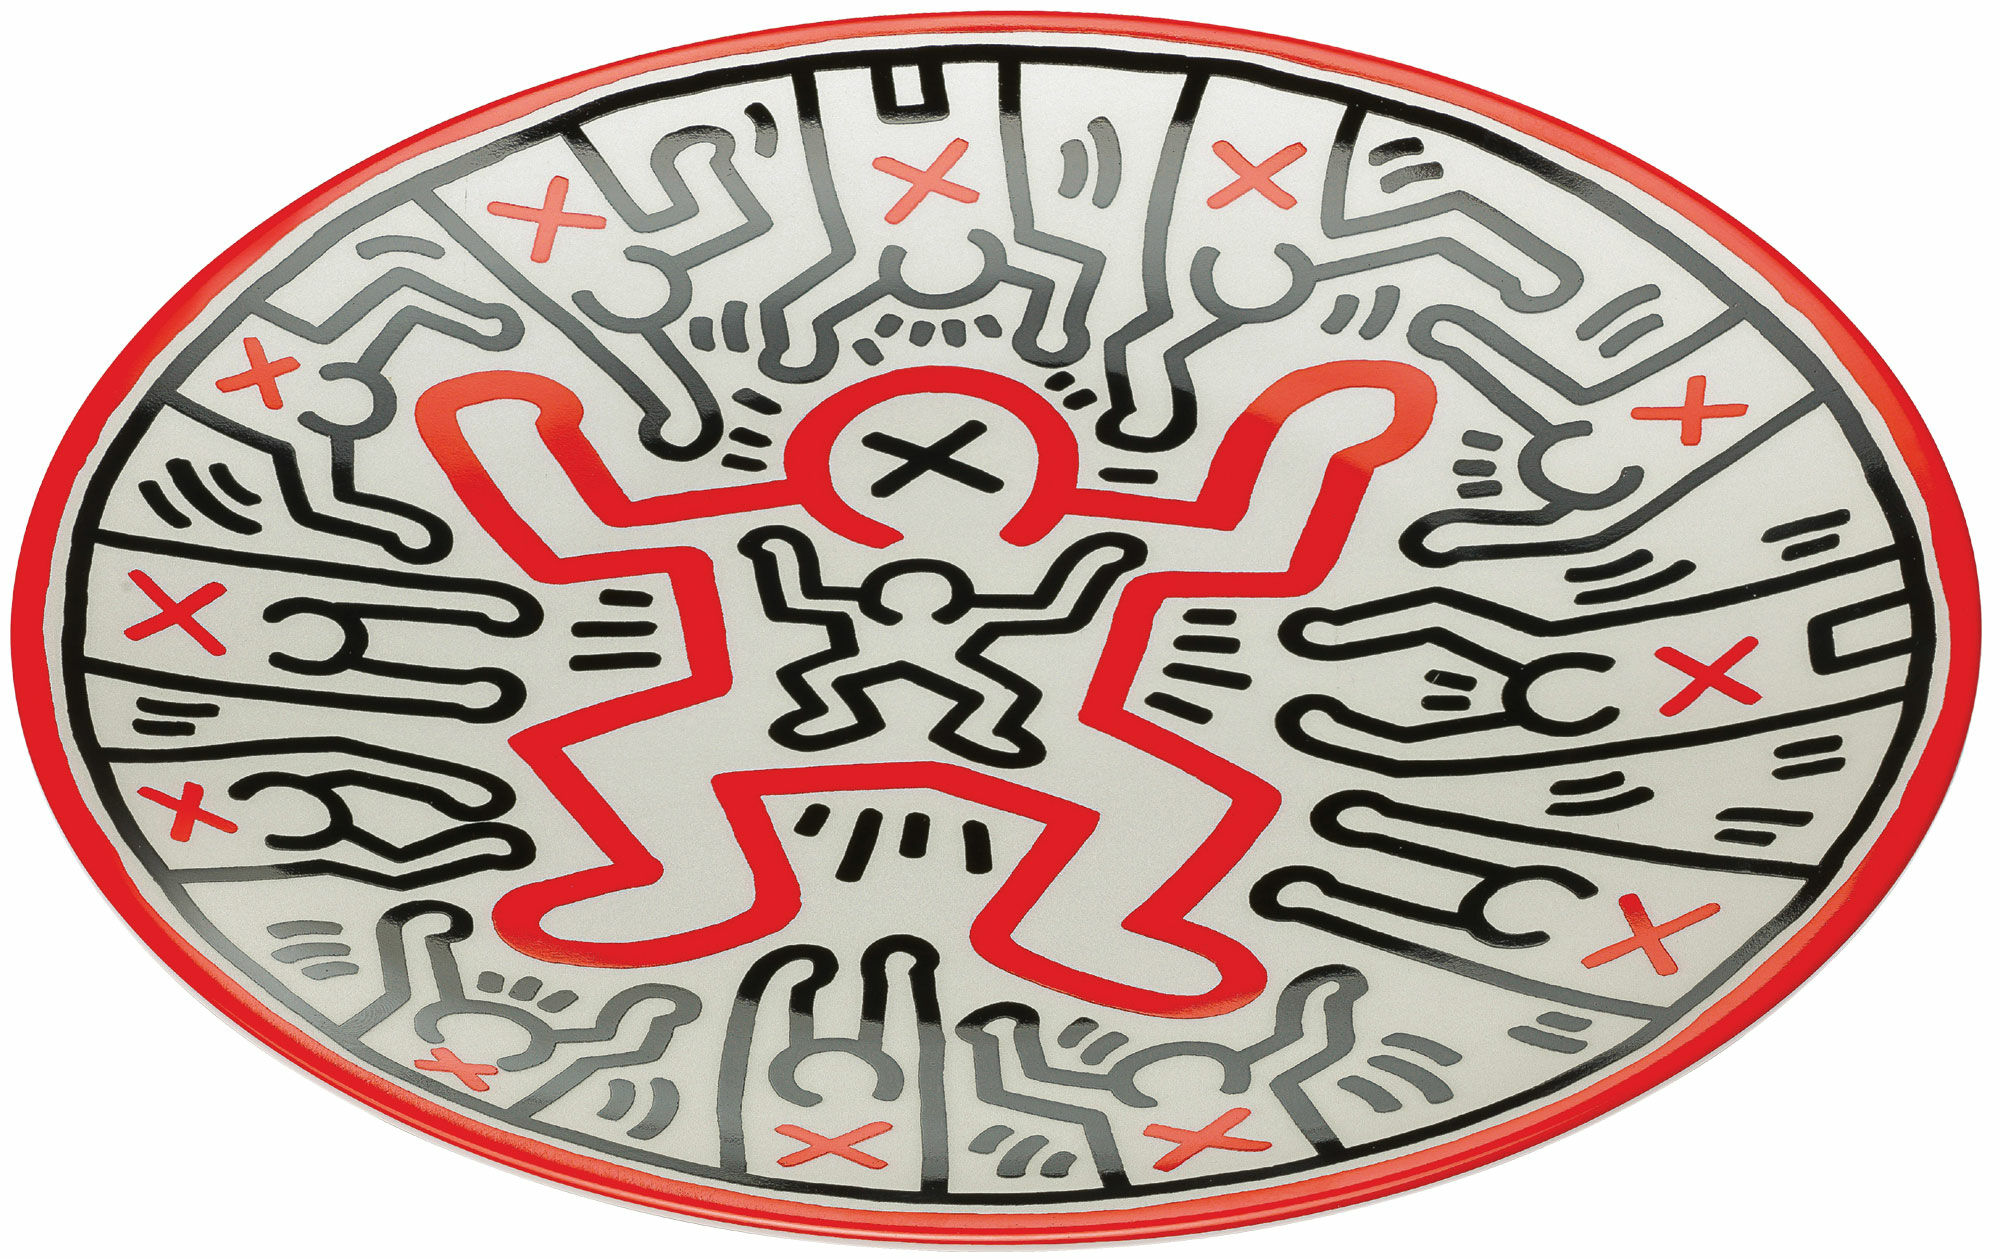 Porcelain plate "Untitled" (2014) by Keith Haring